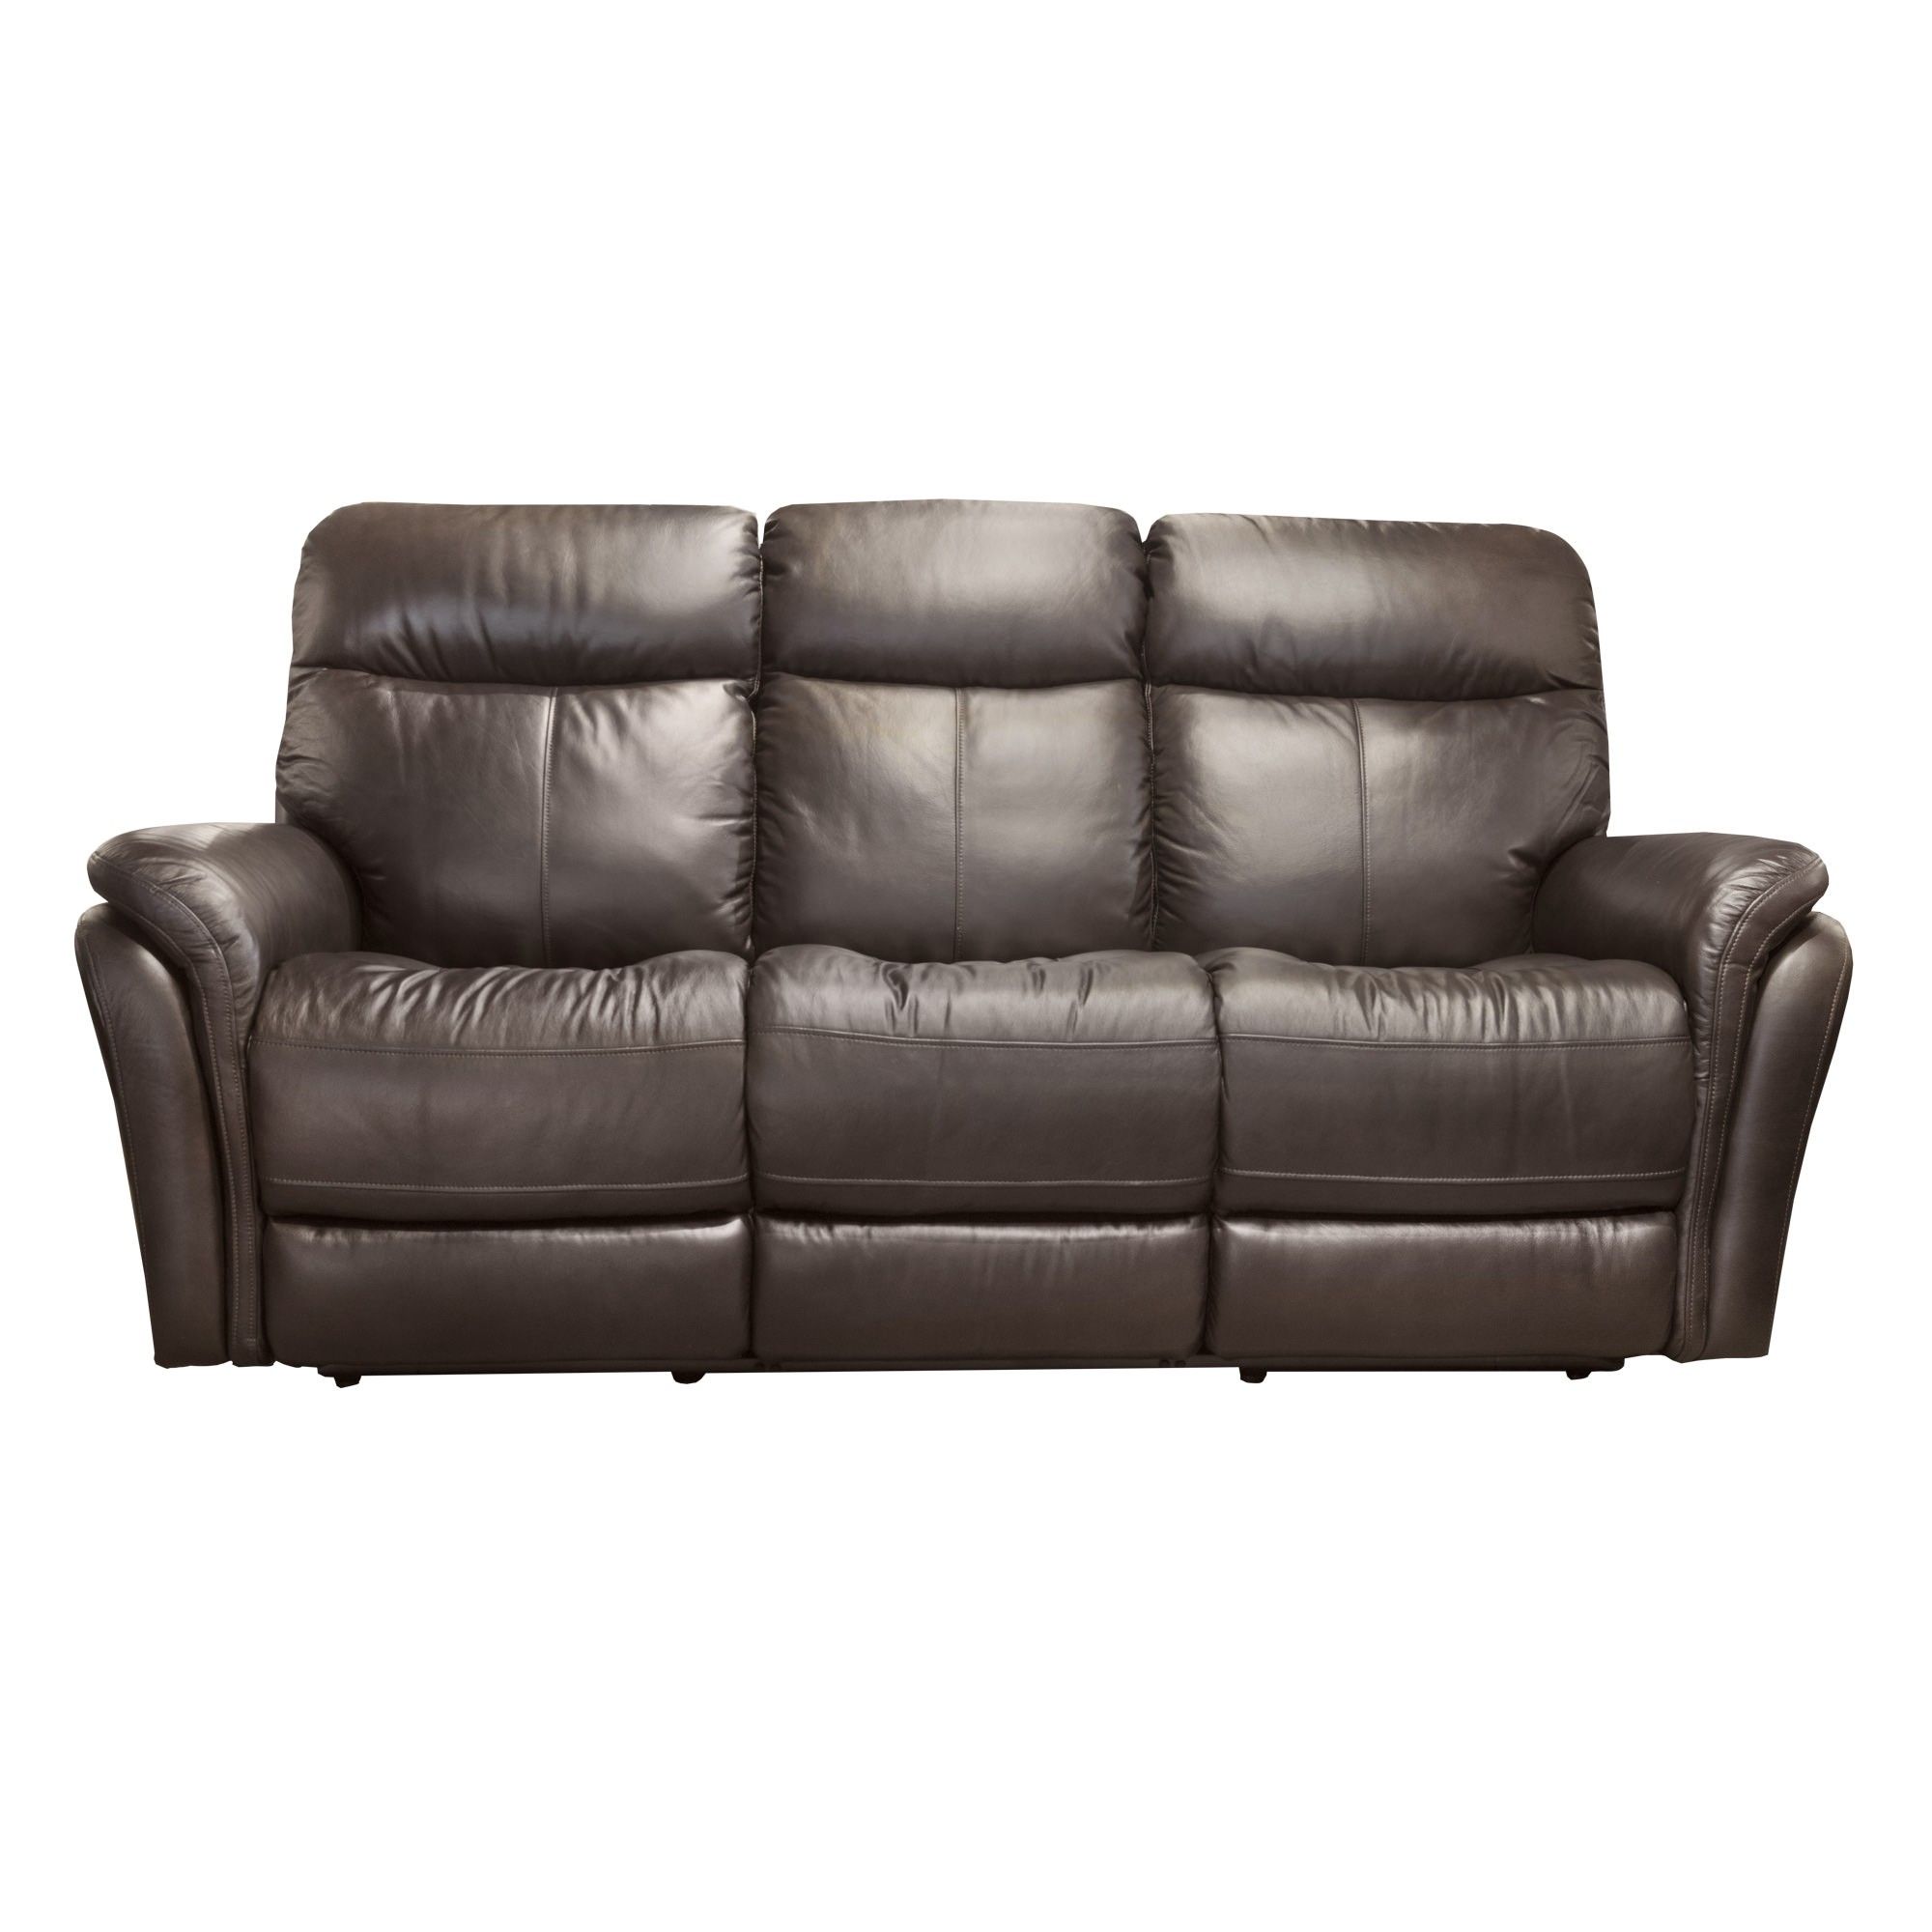 Zoey Brown Power Reclining Sofa With Power Headrest Regarding Expedition Brown Power Reclining Sofas (View 6 of 15)